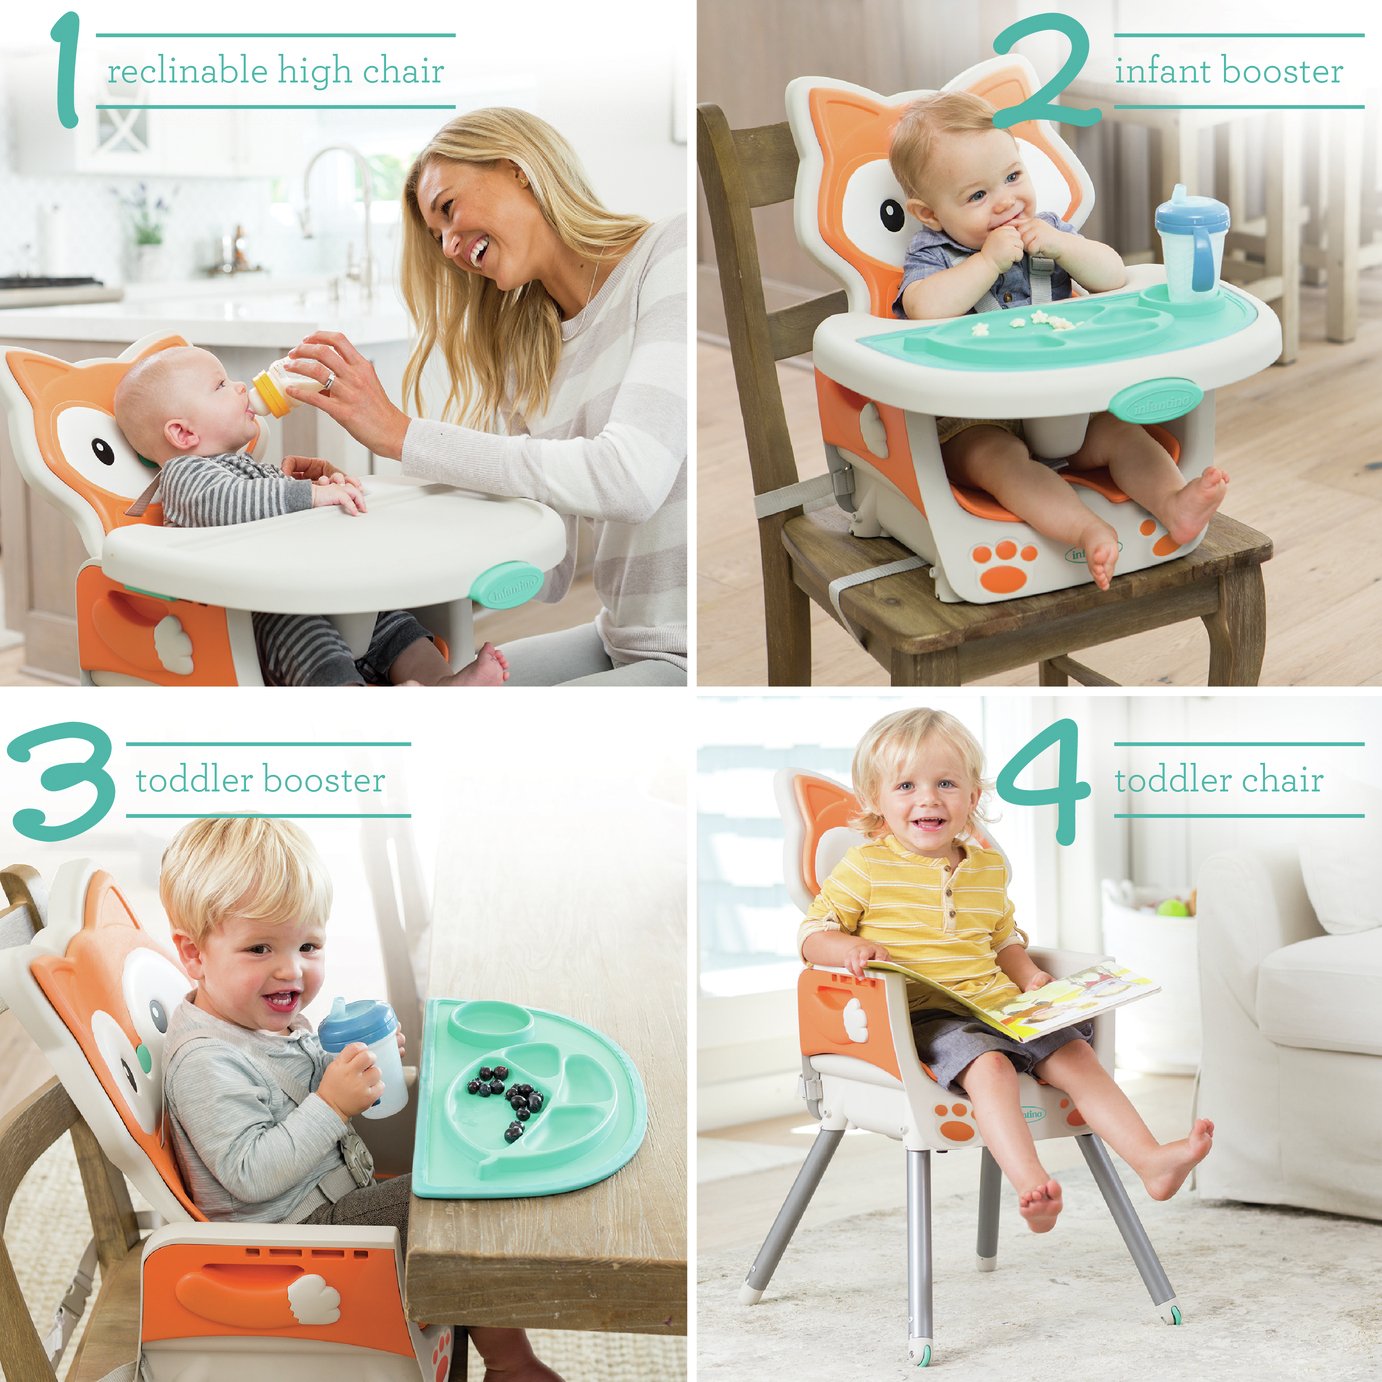 Infantino Fox High Chair Review